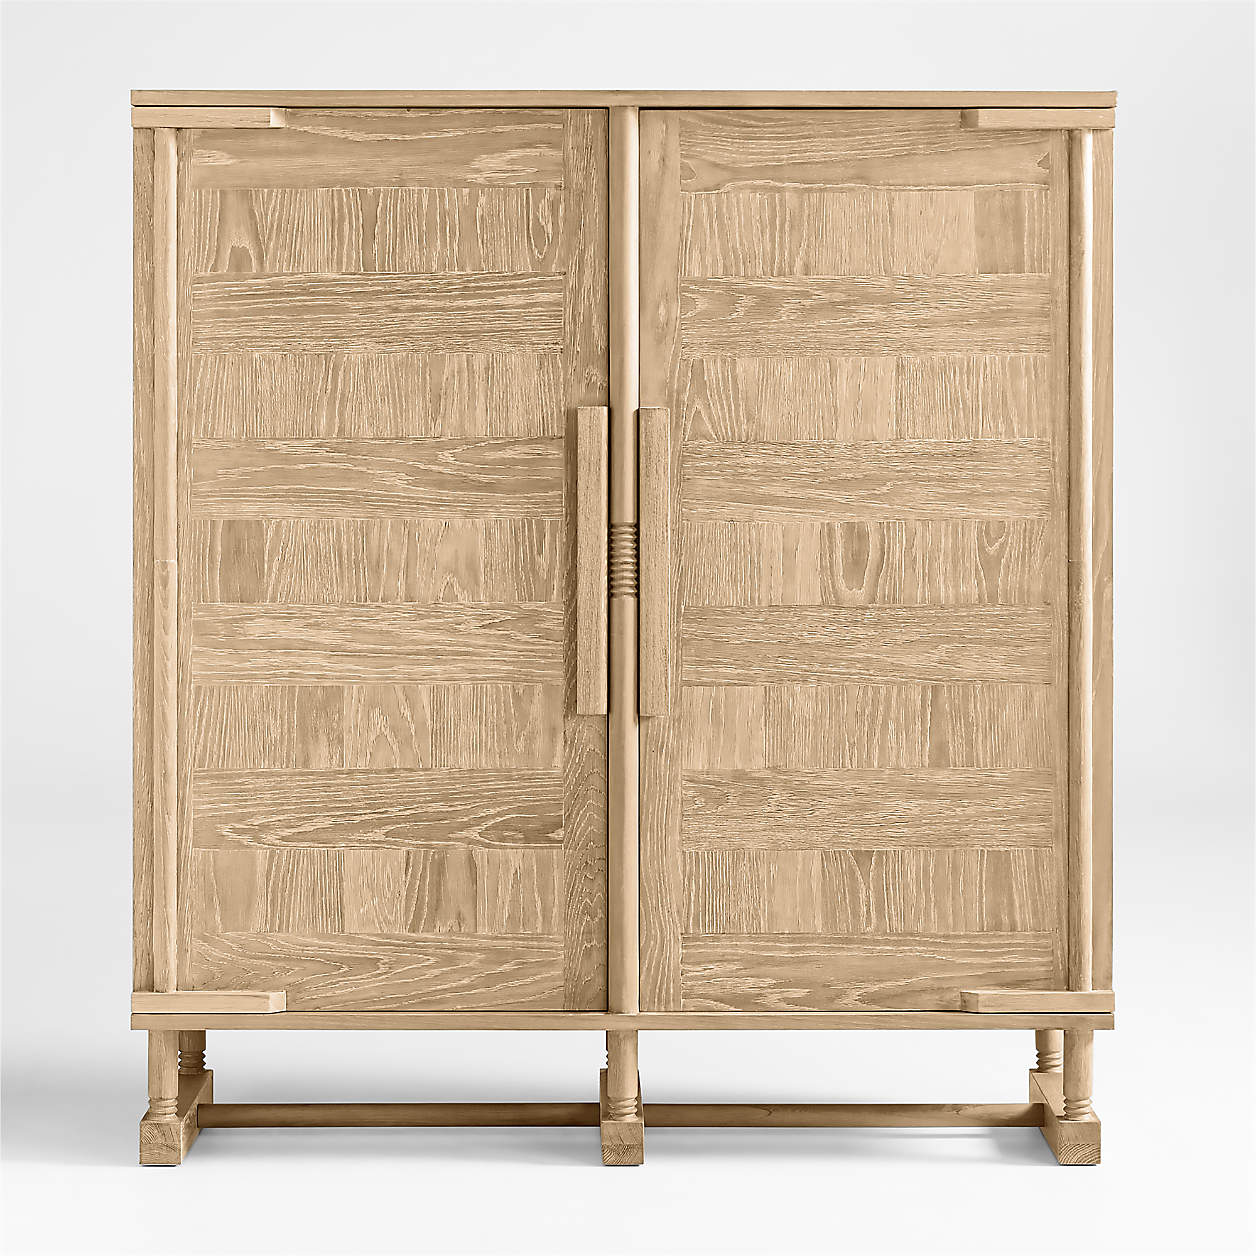 wooden cabinet by Athena Calderone